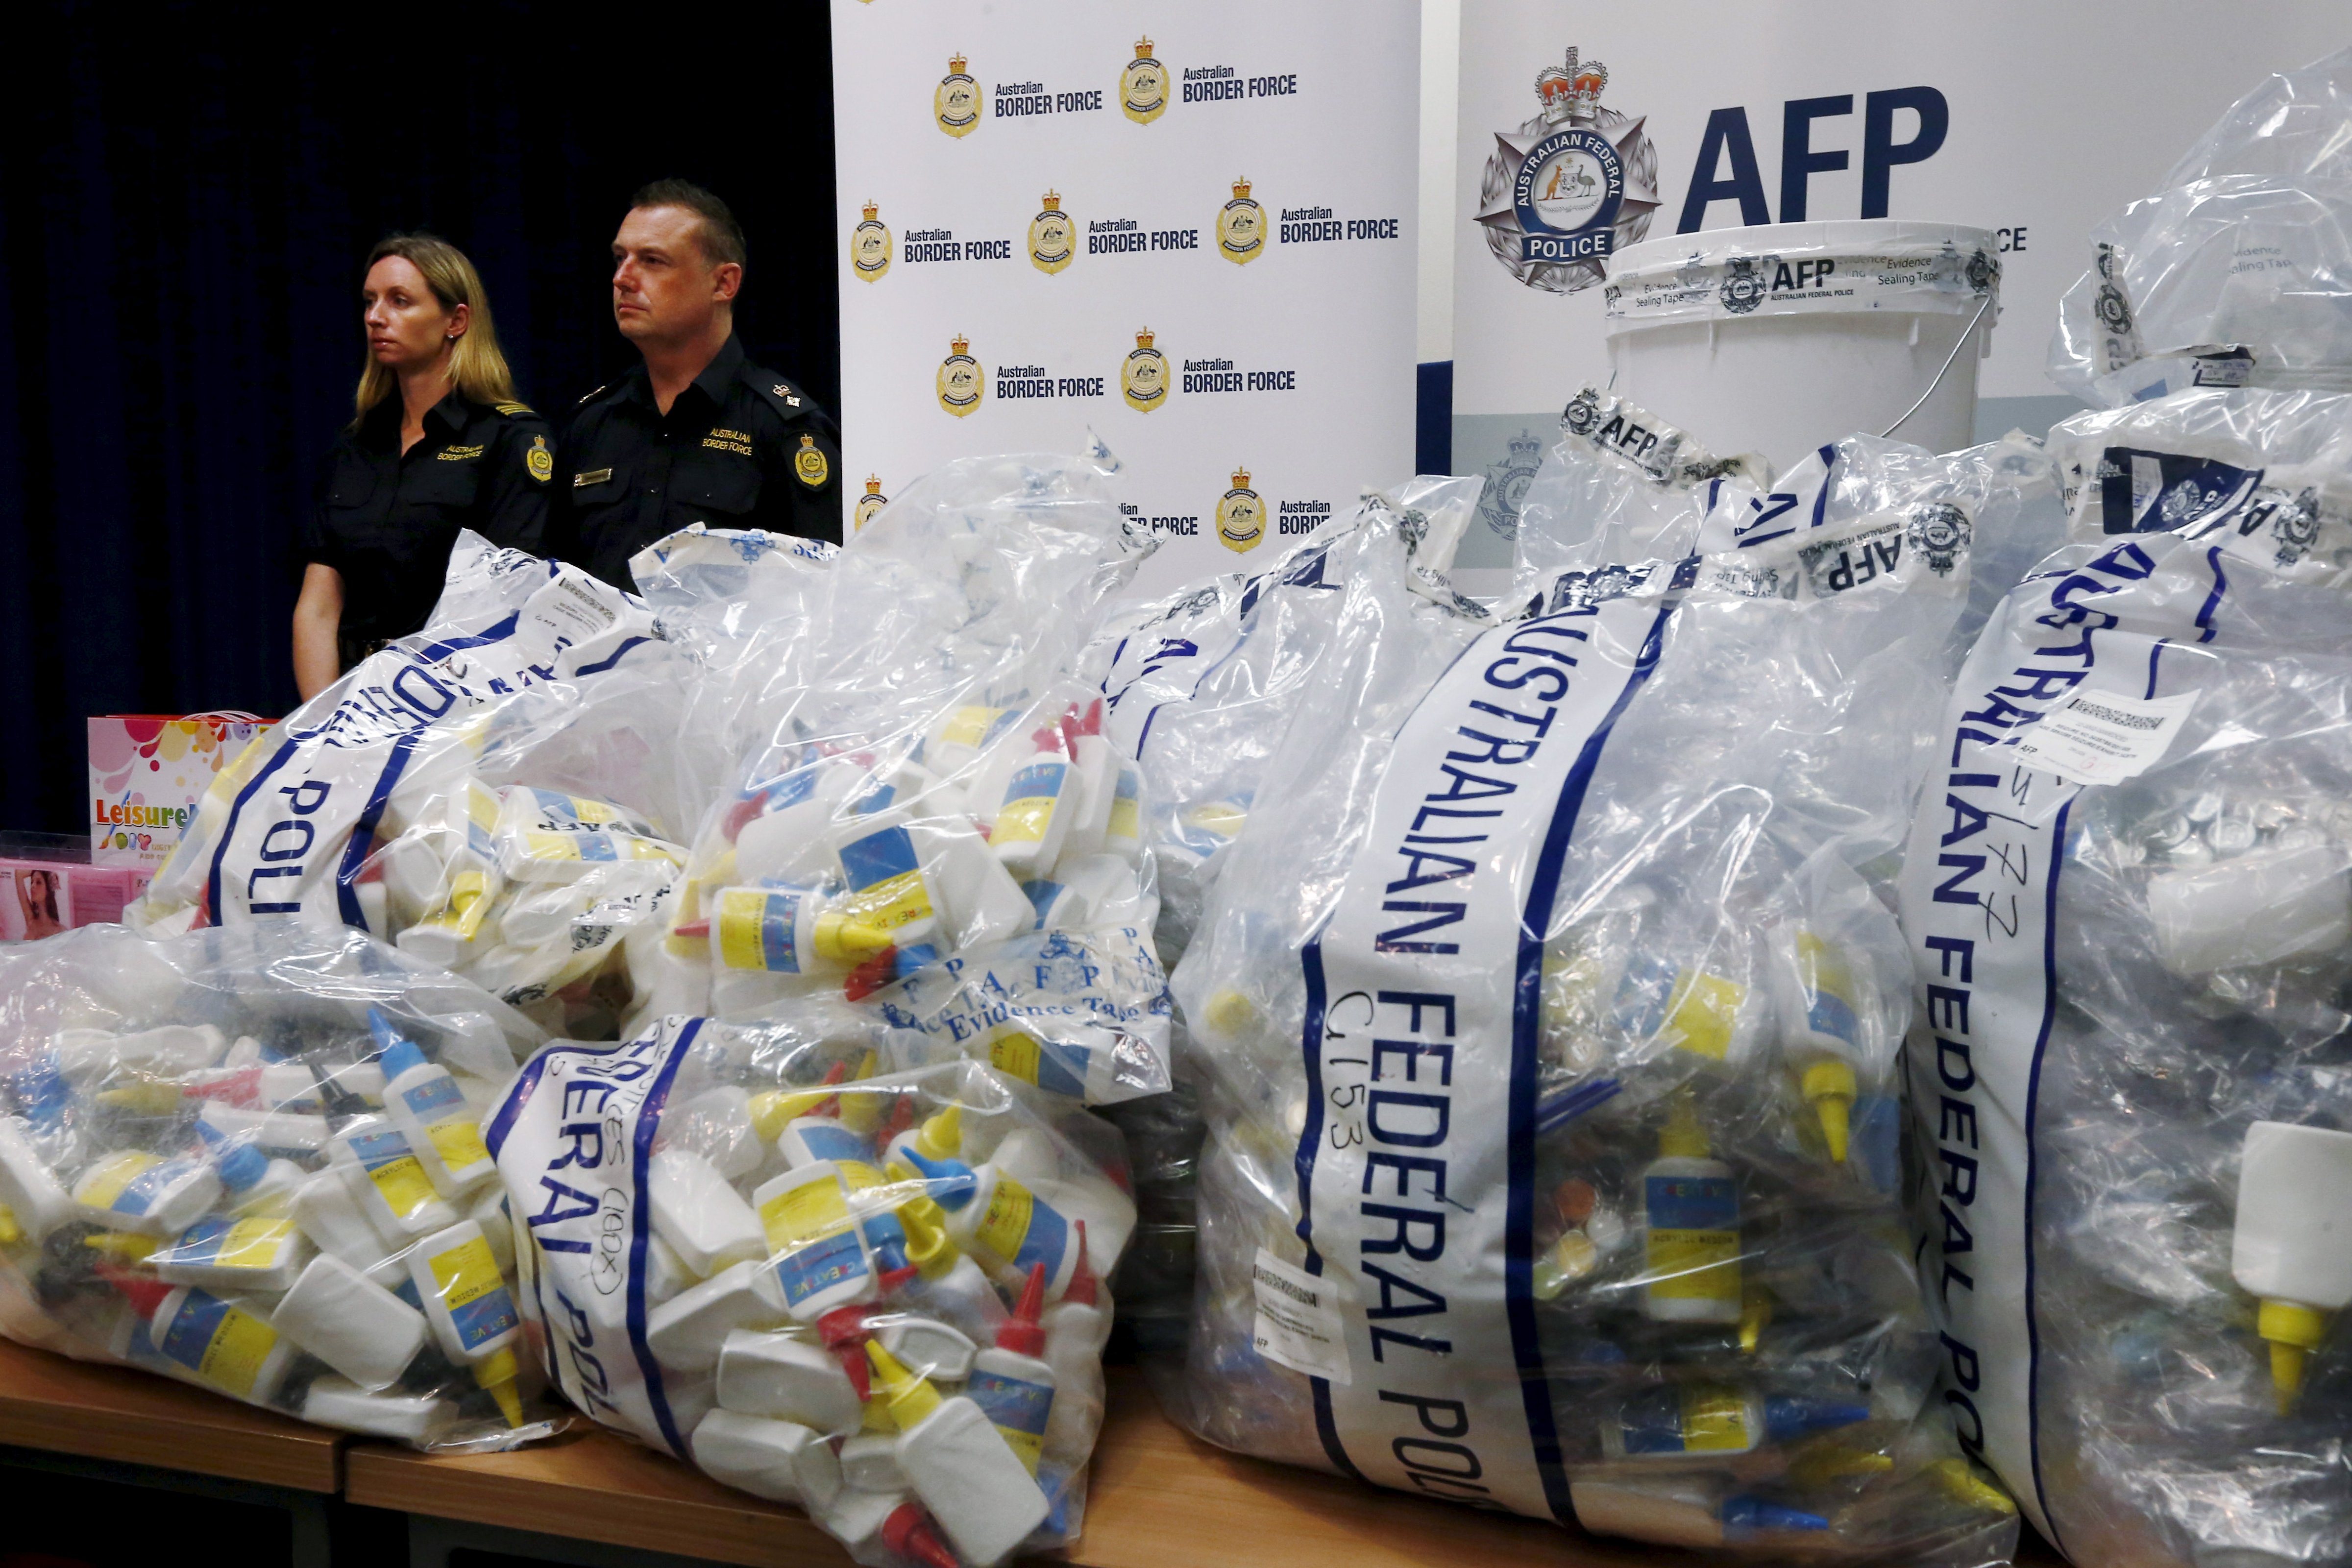 A quantity of liquid methamphetamine disguised in various packaging is put on display by Australian Border Force officers at the Australian Federal Police headquarters in Sydney on Feb. 15, 2016 (Jason Reed—Reuters)